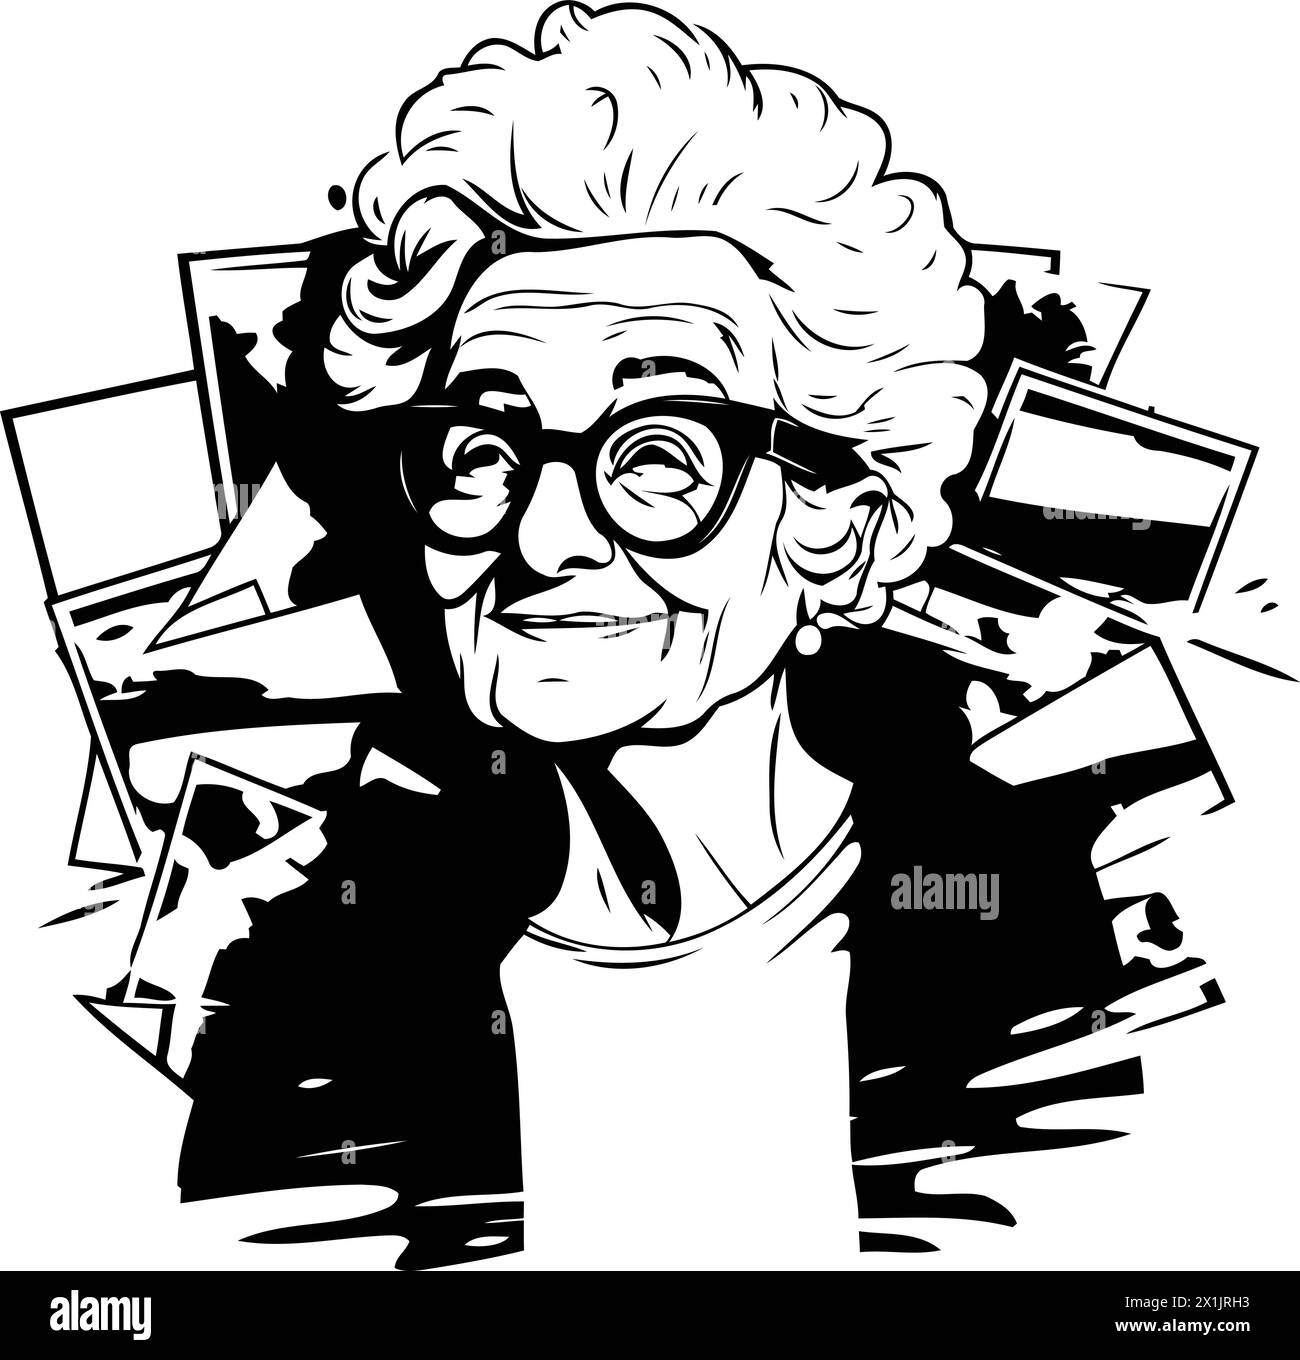 Vector illustration of an old woman with glasses. Portrait of an elderly woman. Stock Vector